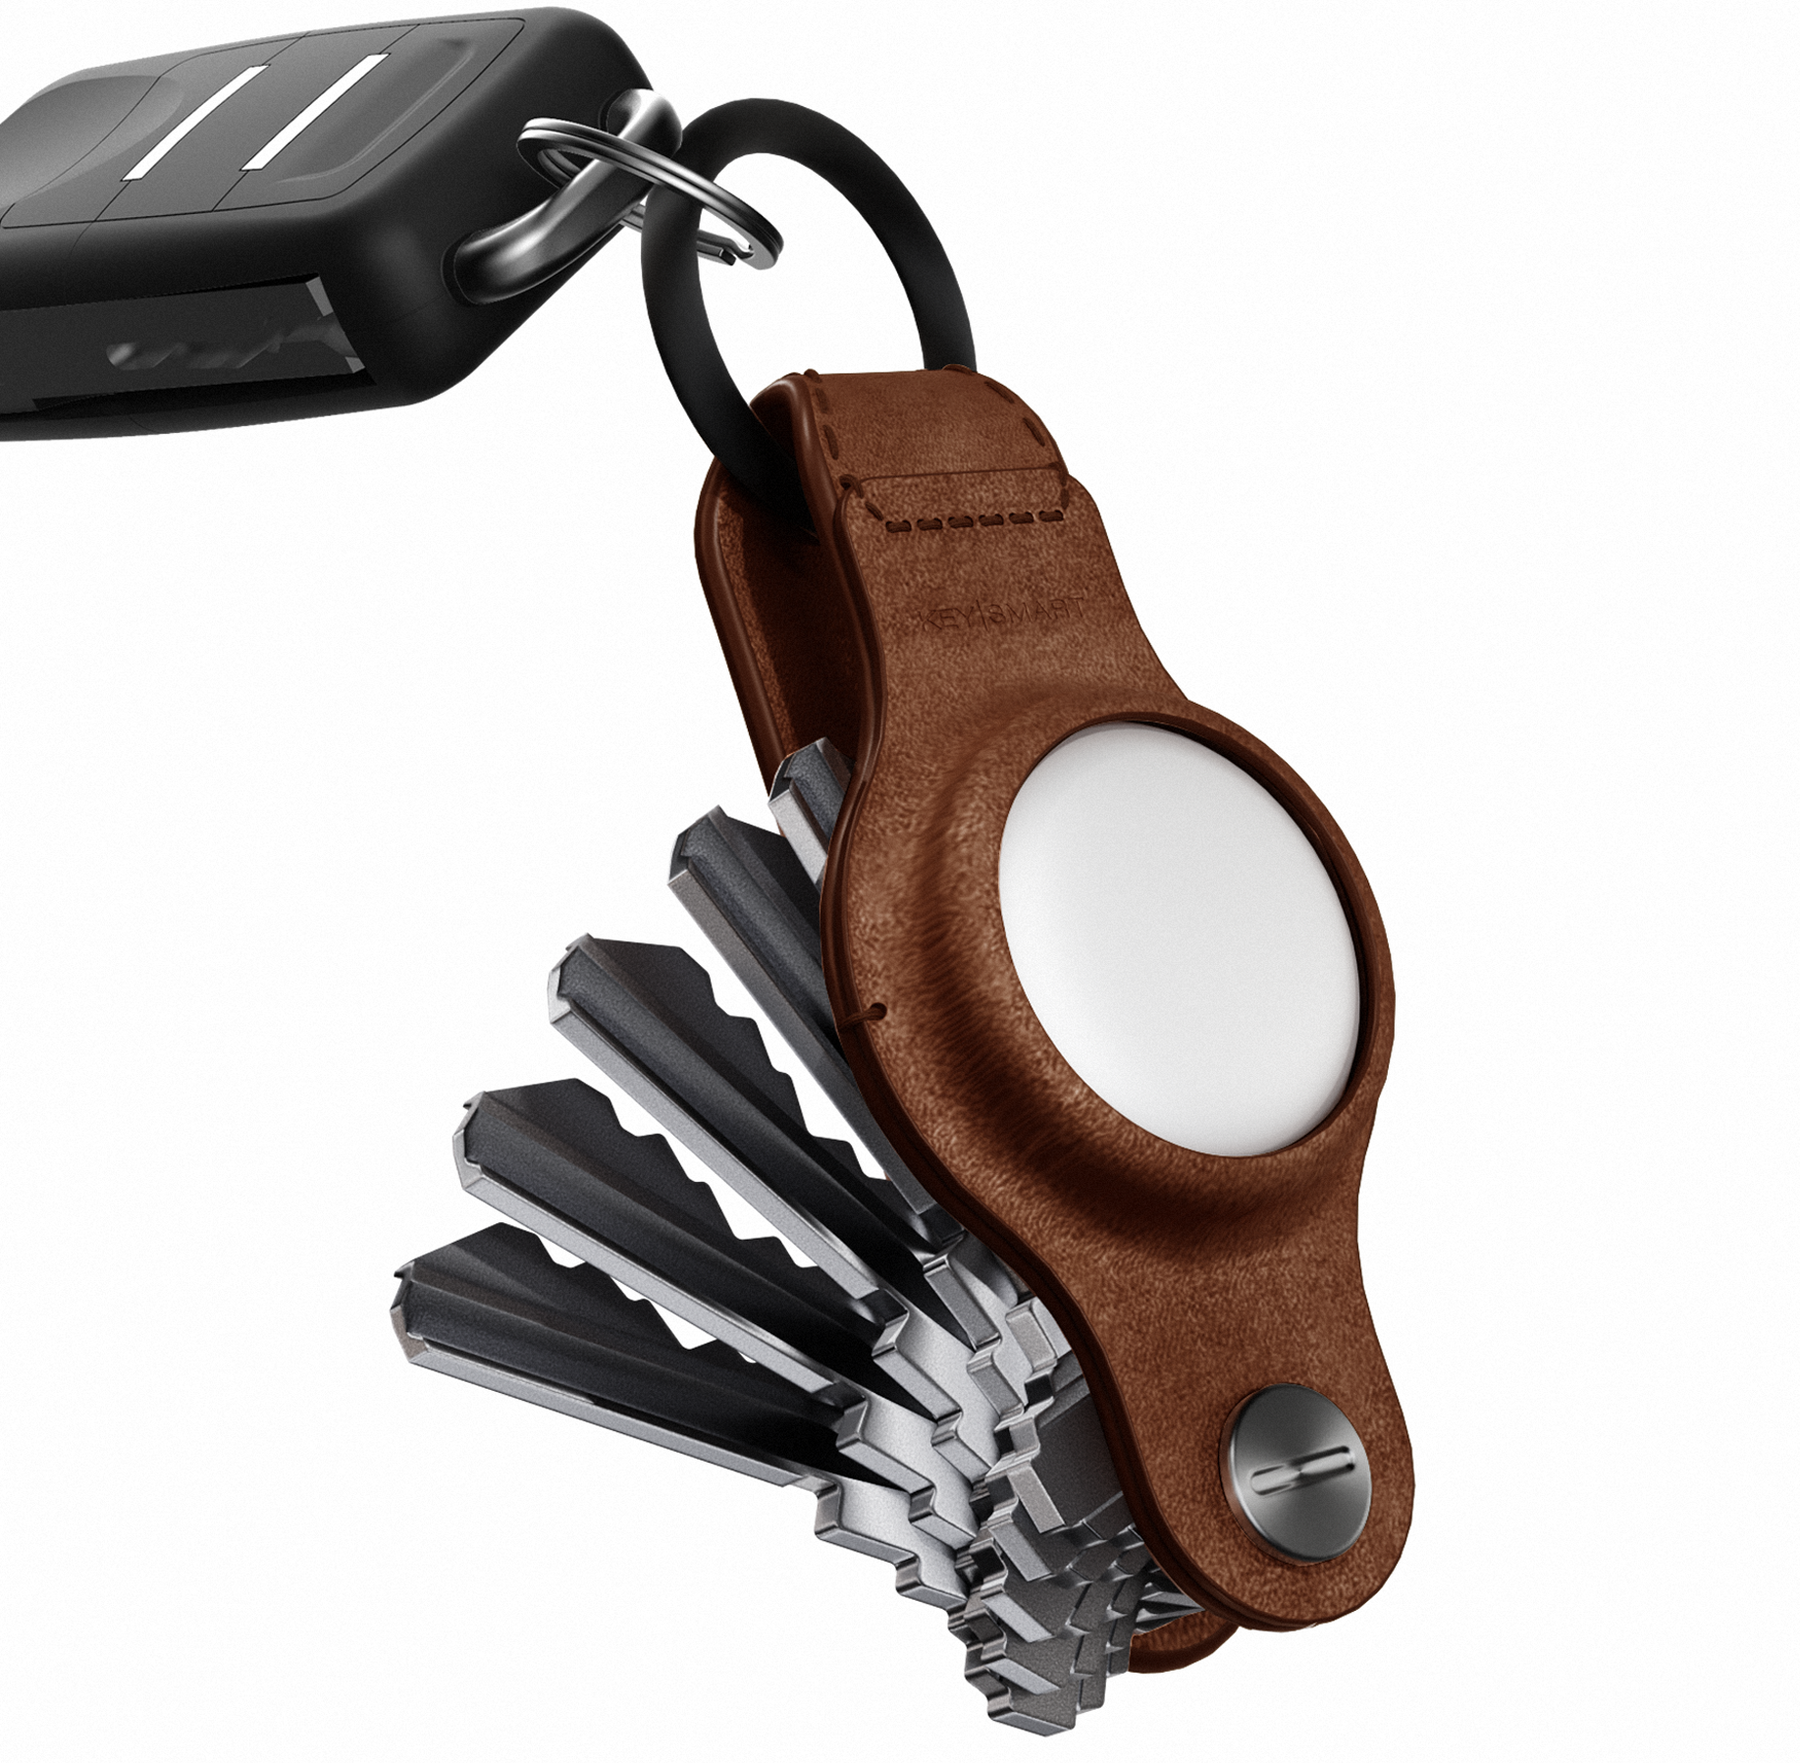 KeySmart Air Compact 2-in-1 AirTag and Key Holder at Swiss Knife Shop